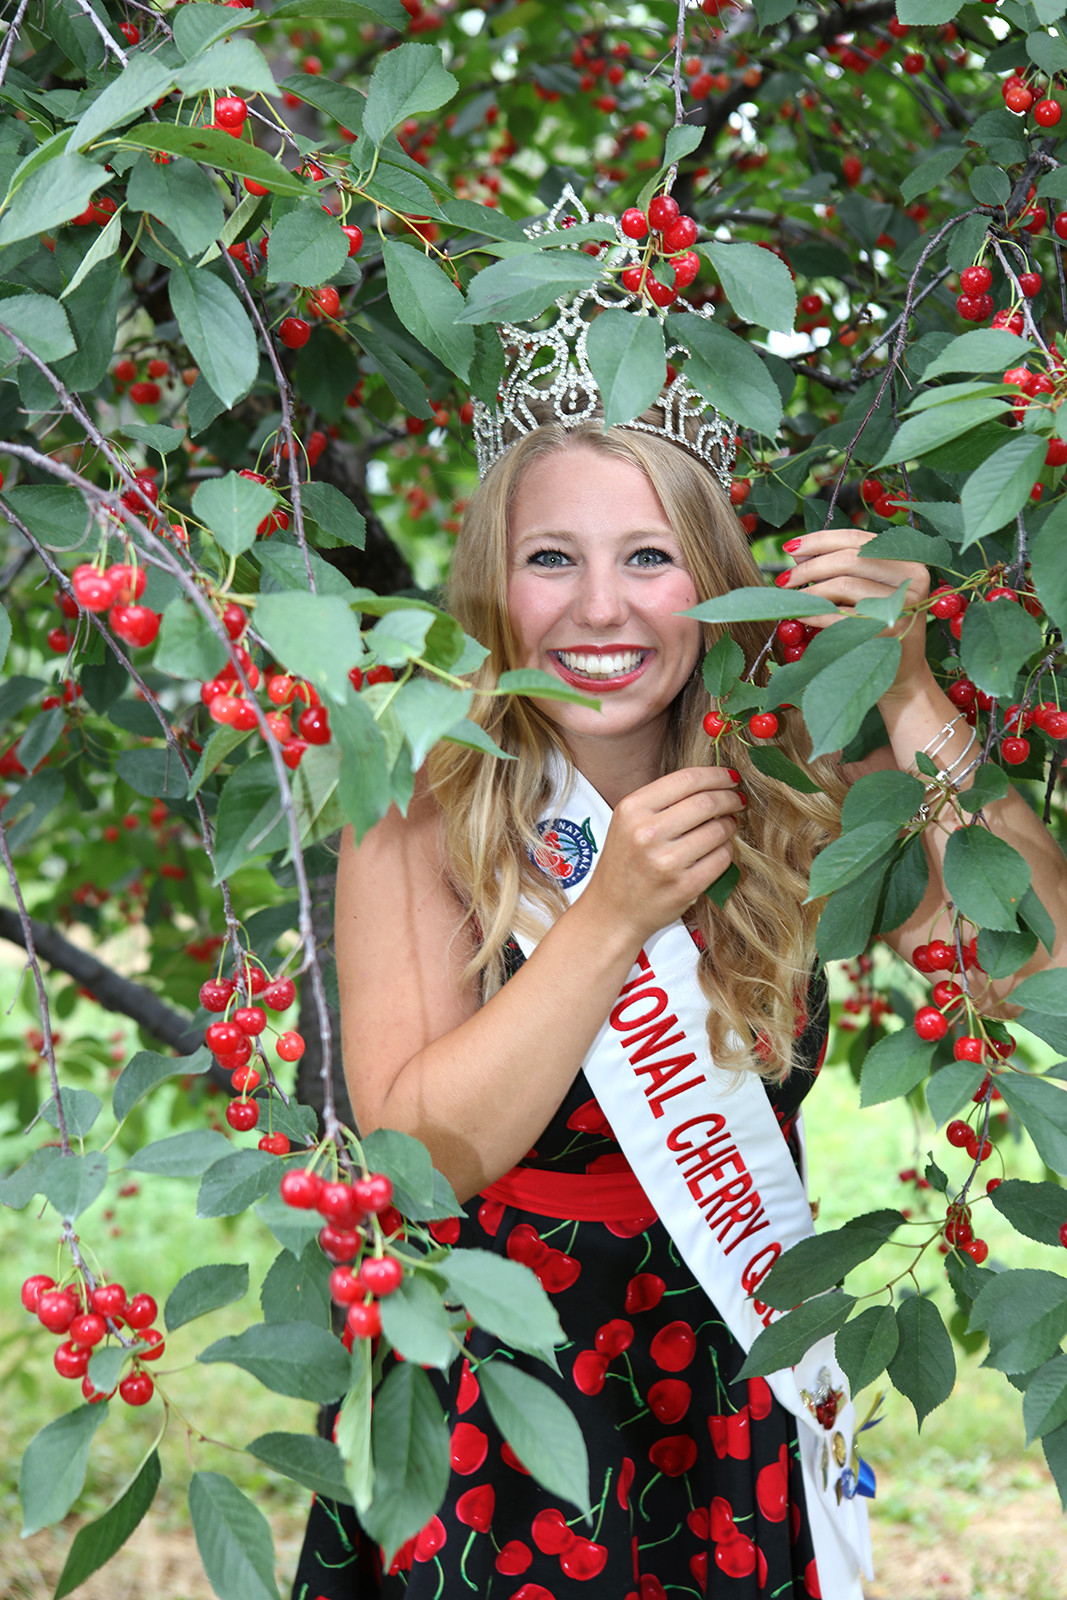 We’re Saluting The National Cherry Festival With The Festival Queen As